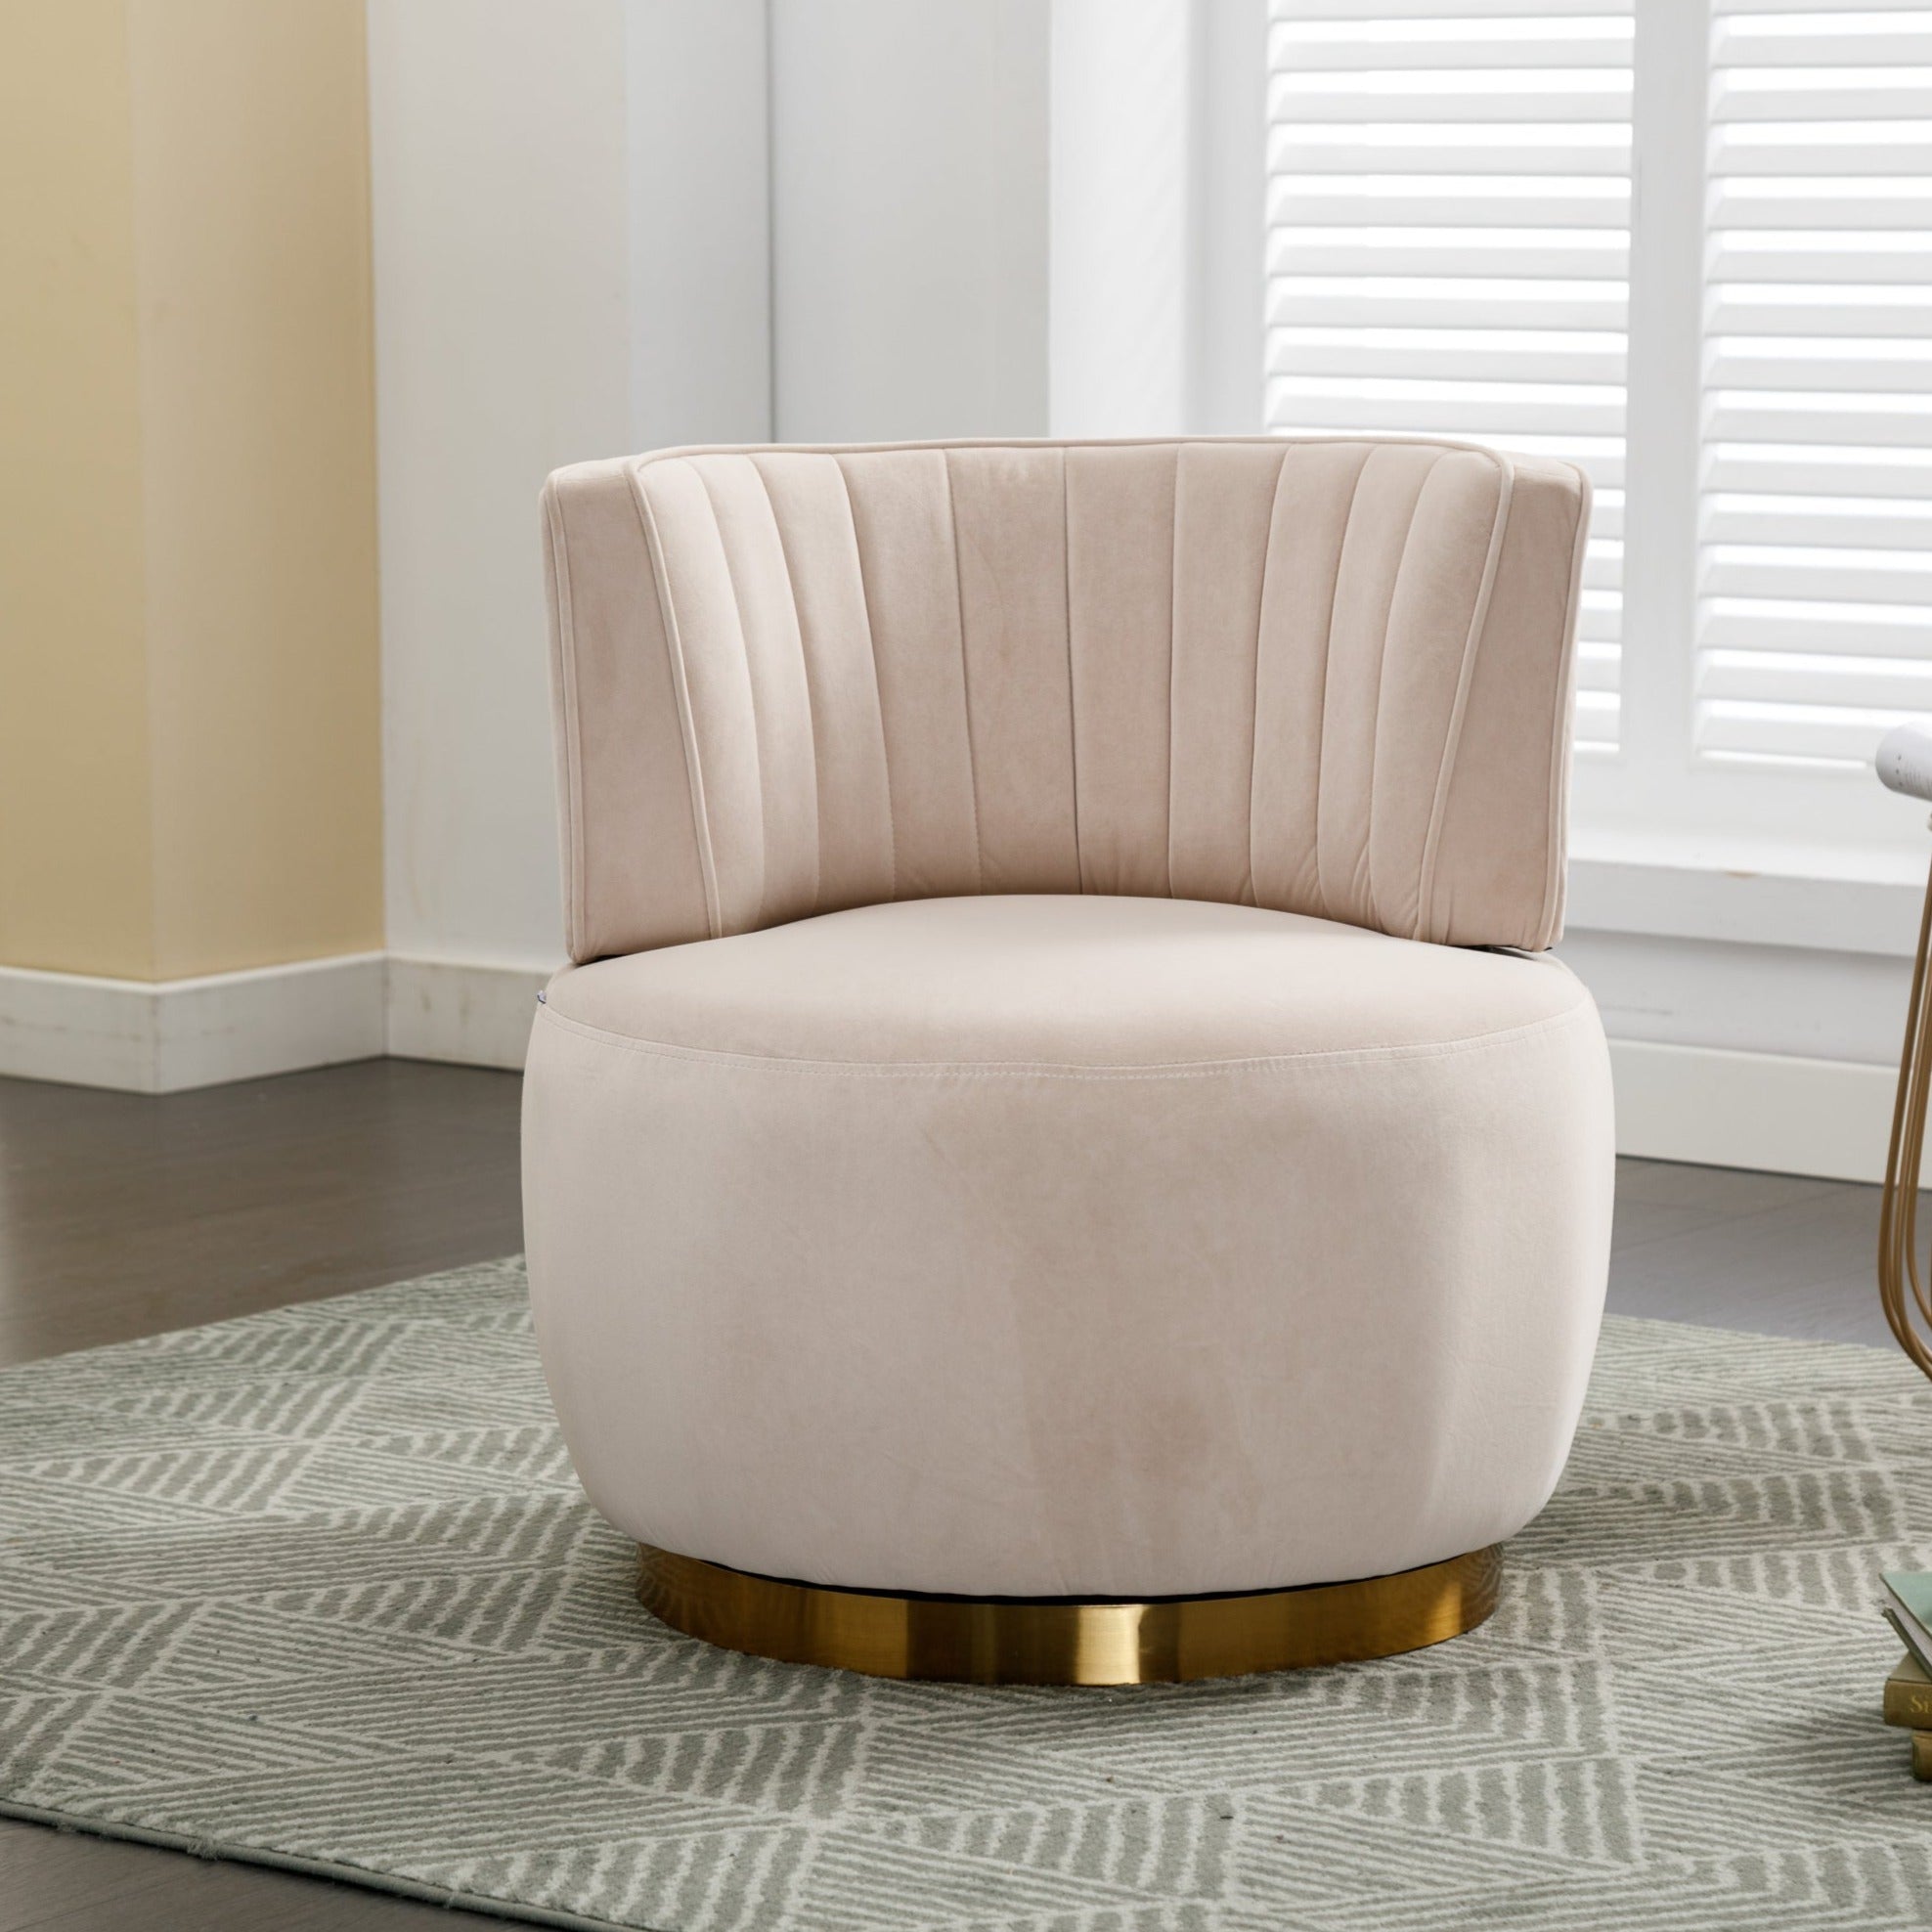 Becca beige Velvet Swivel Accent Barrel Chair with Channel Back and Gold Trim Base